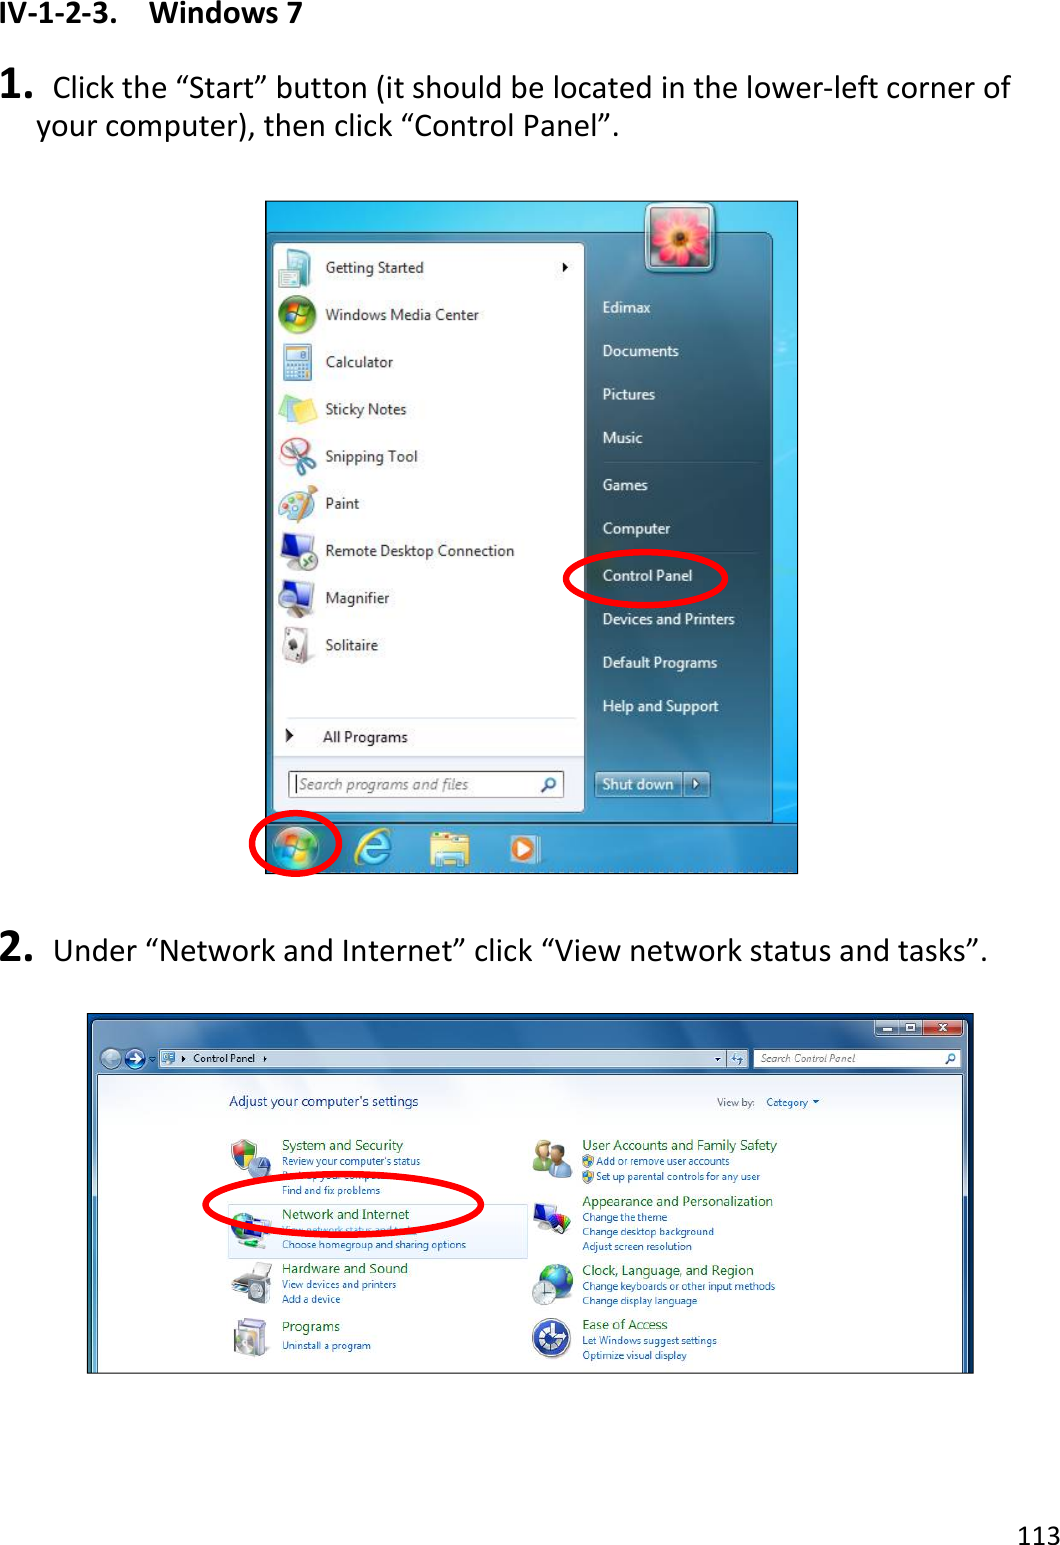 113  IV-1-2-3.  Windows 7  1.   Click the “Start” button (it should be located in the lower-left corner of your computer), then click “Control Panel”.    2.   Under “Network and Internet” click “View network status and tasks”.      